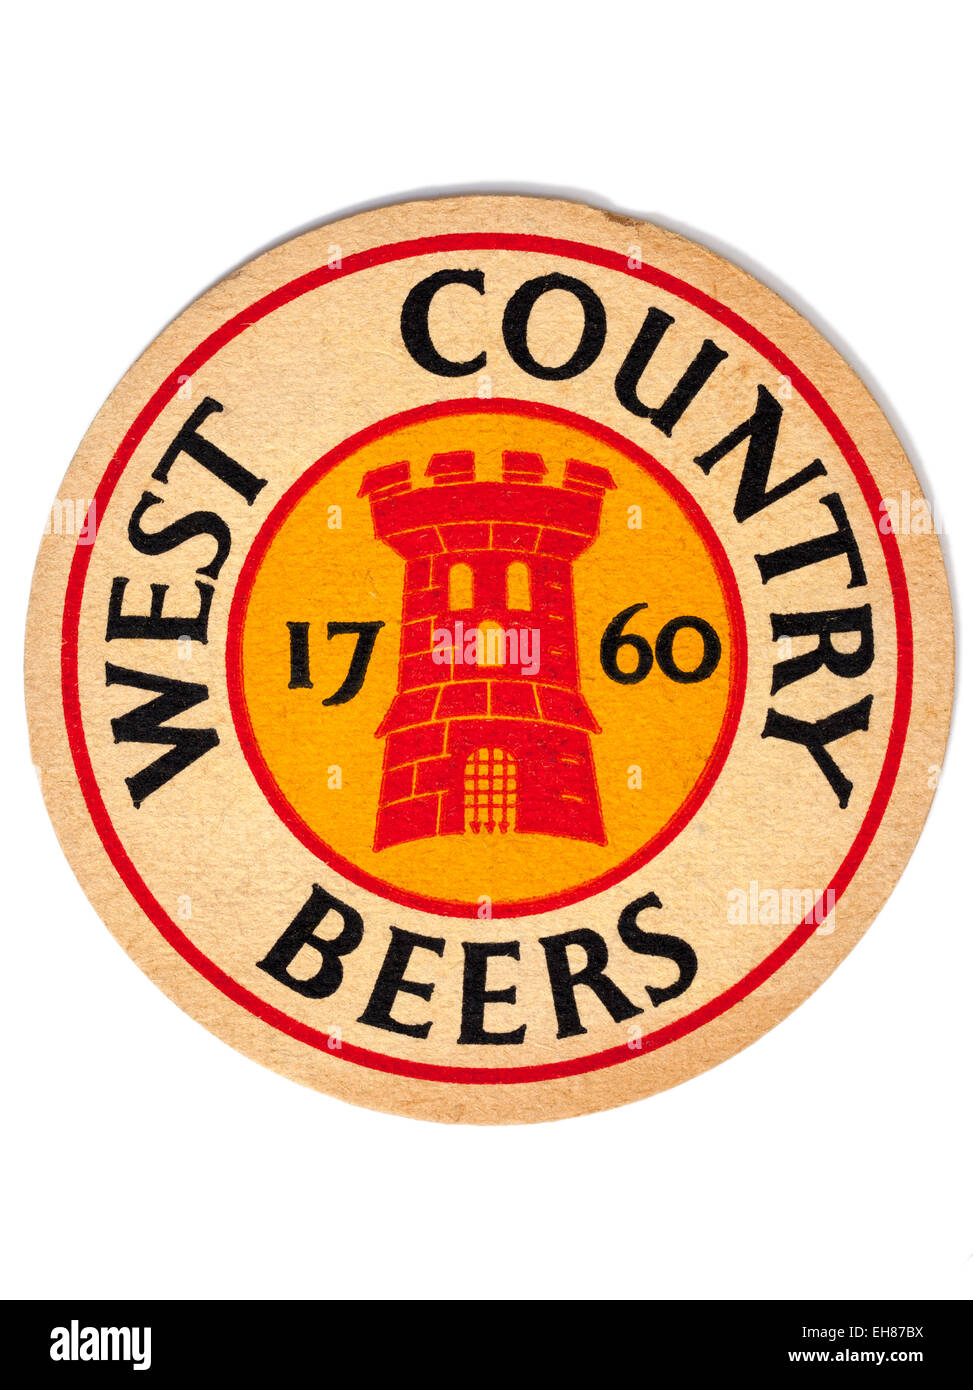 Vintage simGangster Werbung West Country Biere Stockfoto